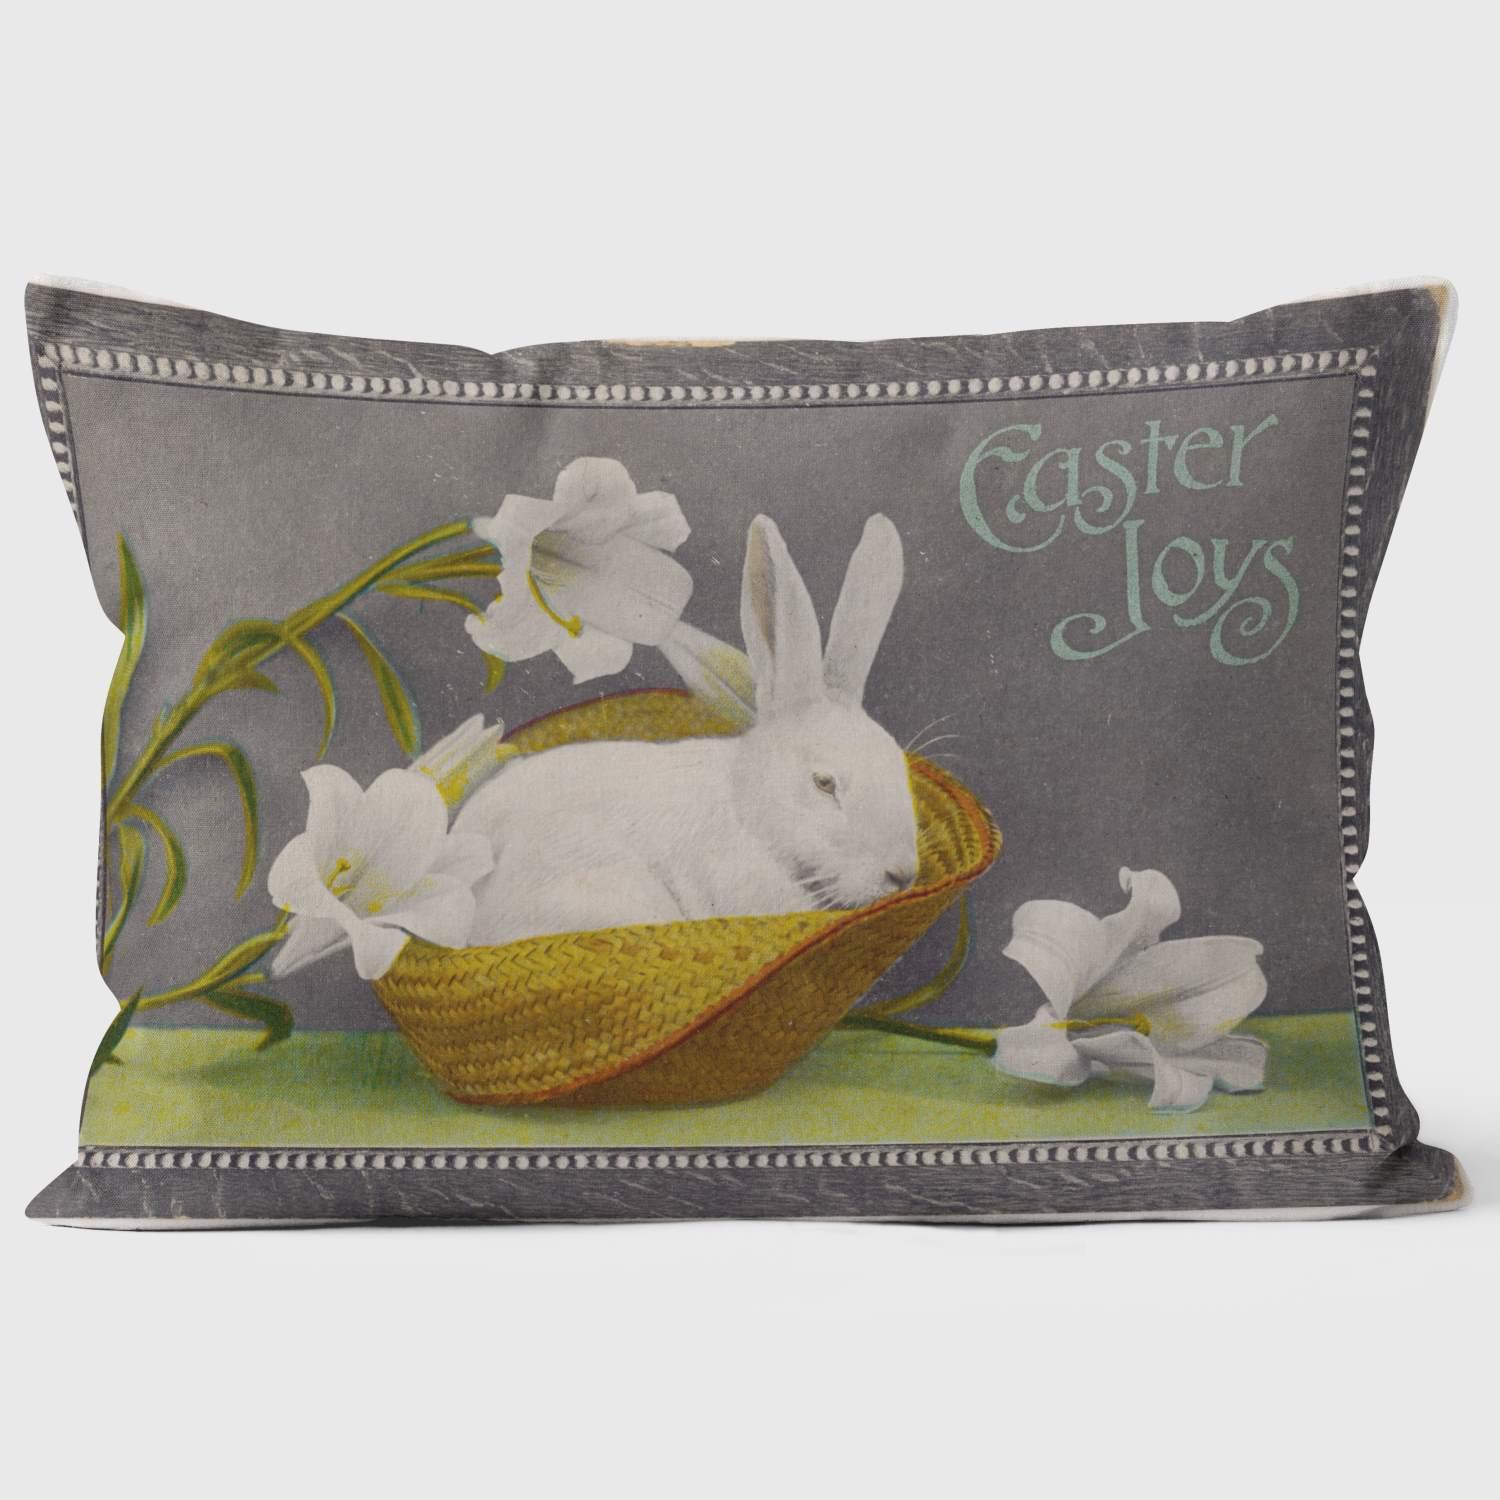 Easter Joys - Special Occasions Cushion - Handmade Cushions UK - WeLoveCushions